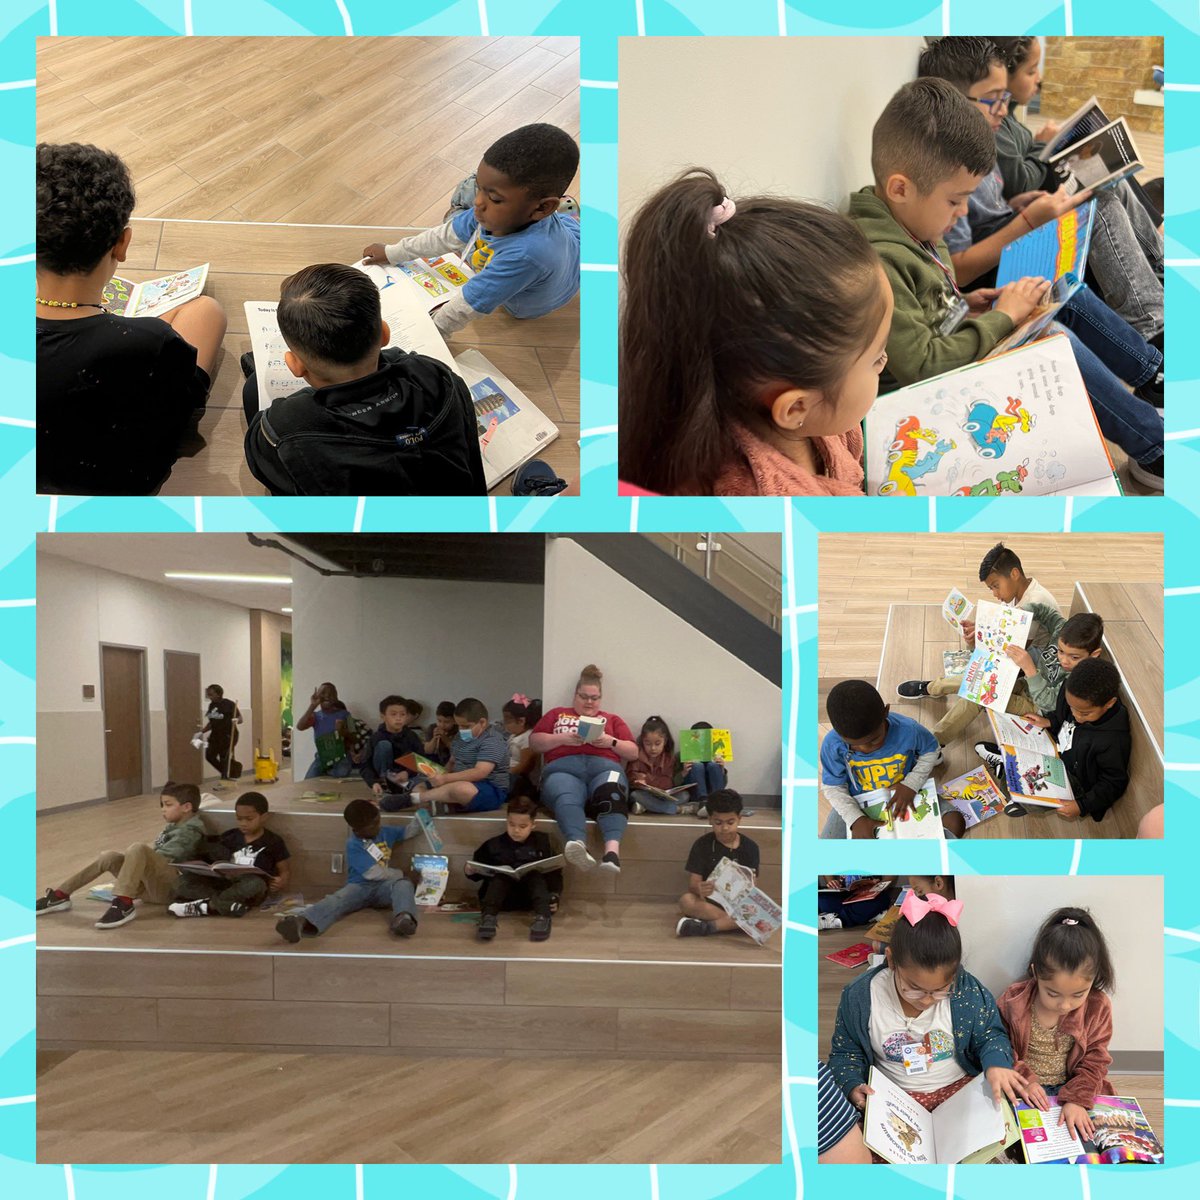 Drop EVERYTHING and Read! That is exactly what we did this morning. I even got in on the fun with my current read all huddled up with my kiddos! #DropEverythingAndRead #DEARday #FabulousFirsties #ReadersAreLeaders @LakelandLibrary @HumbleISD_LLE @MsBenton_LLE_AP @HumbleISD